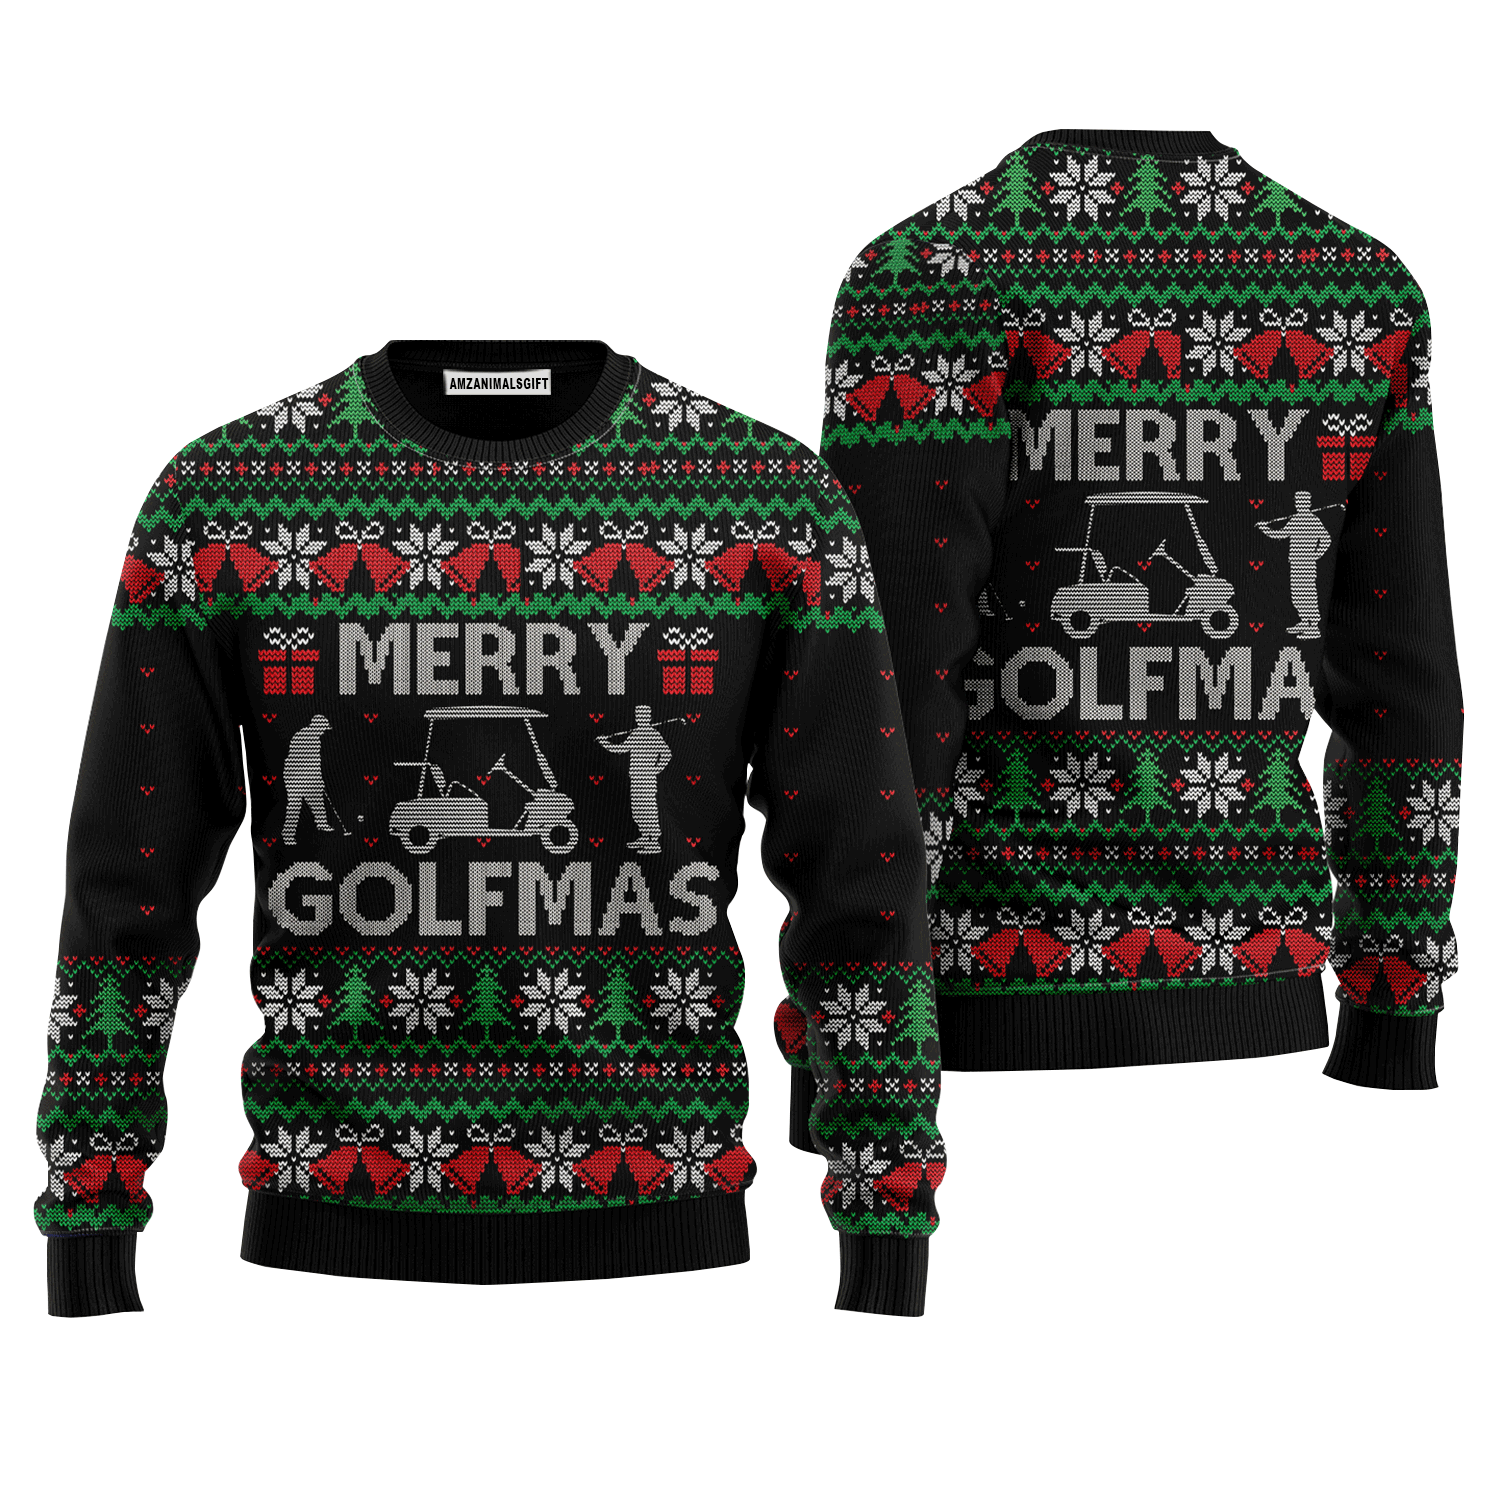 Merry Golfmas Sweater Christmas, Ugly Sweater For Men & Women, Perfect Outfit For Christmas New Year Autumn Winter